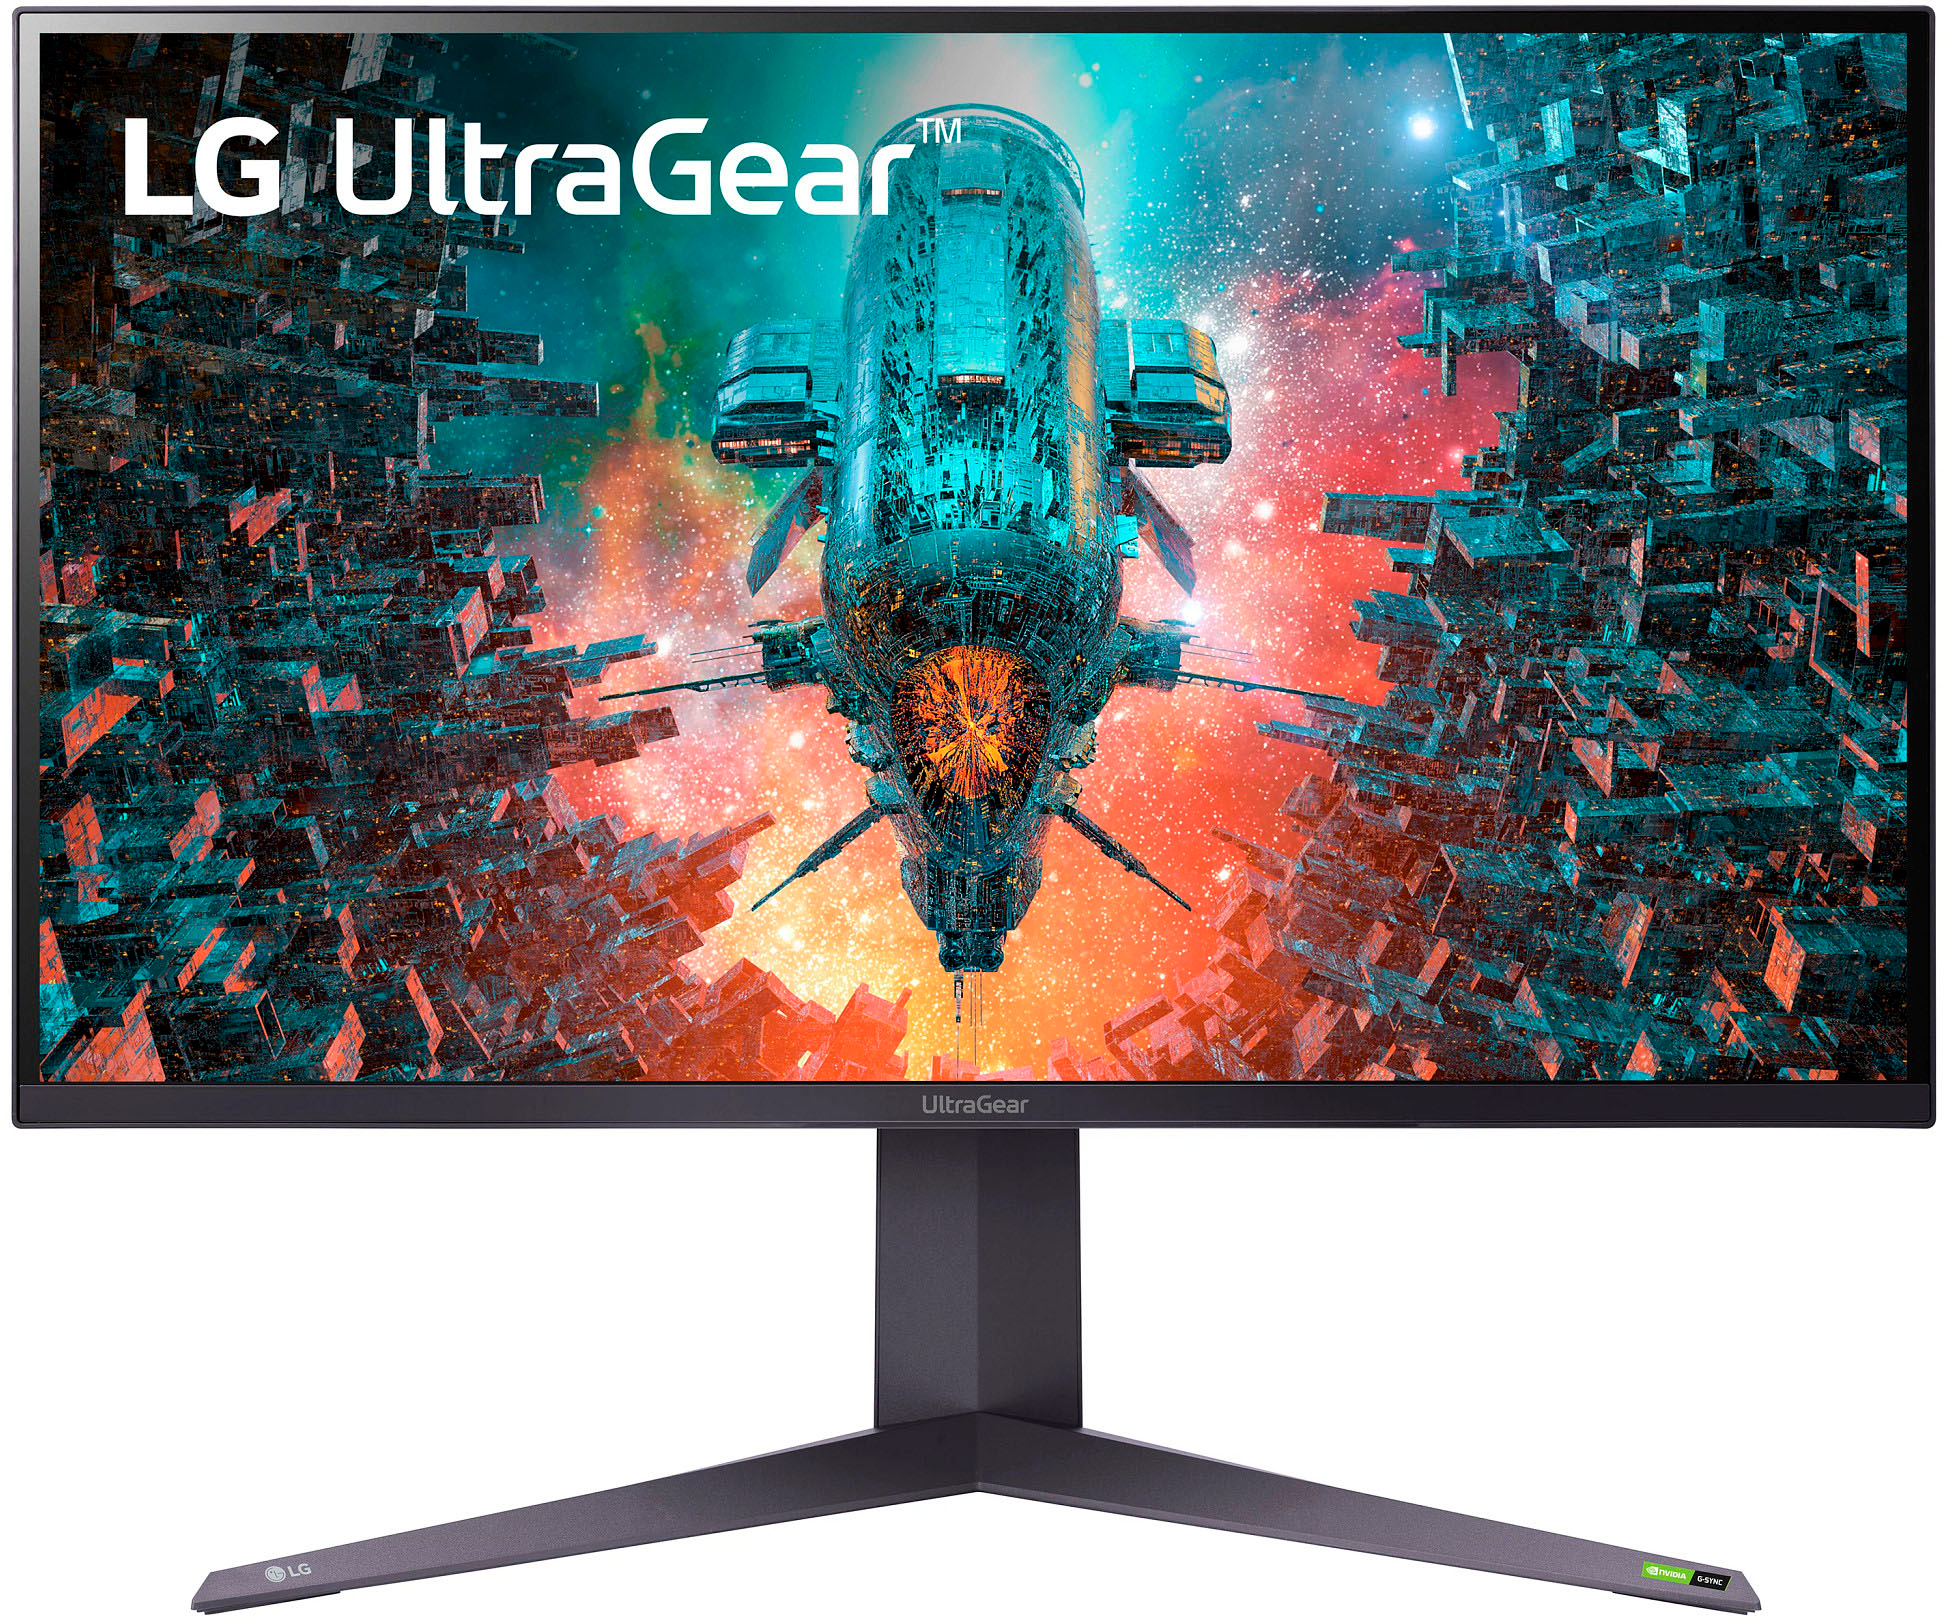 LG UltraGear 32" IPS LED 4K UHD G-SYNC Compatible and AMD FreeSync Premium Pro Monitor with HDR (HDMI, DisplayPort) 32GQ950-B - Best Buy